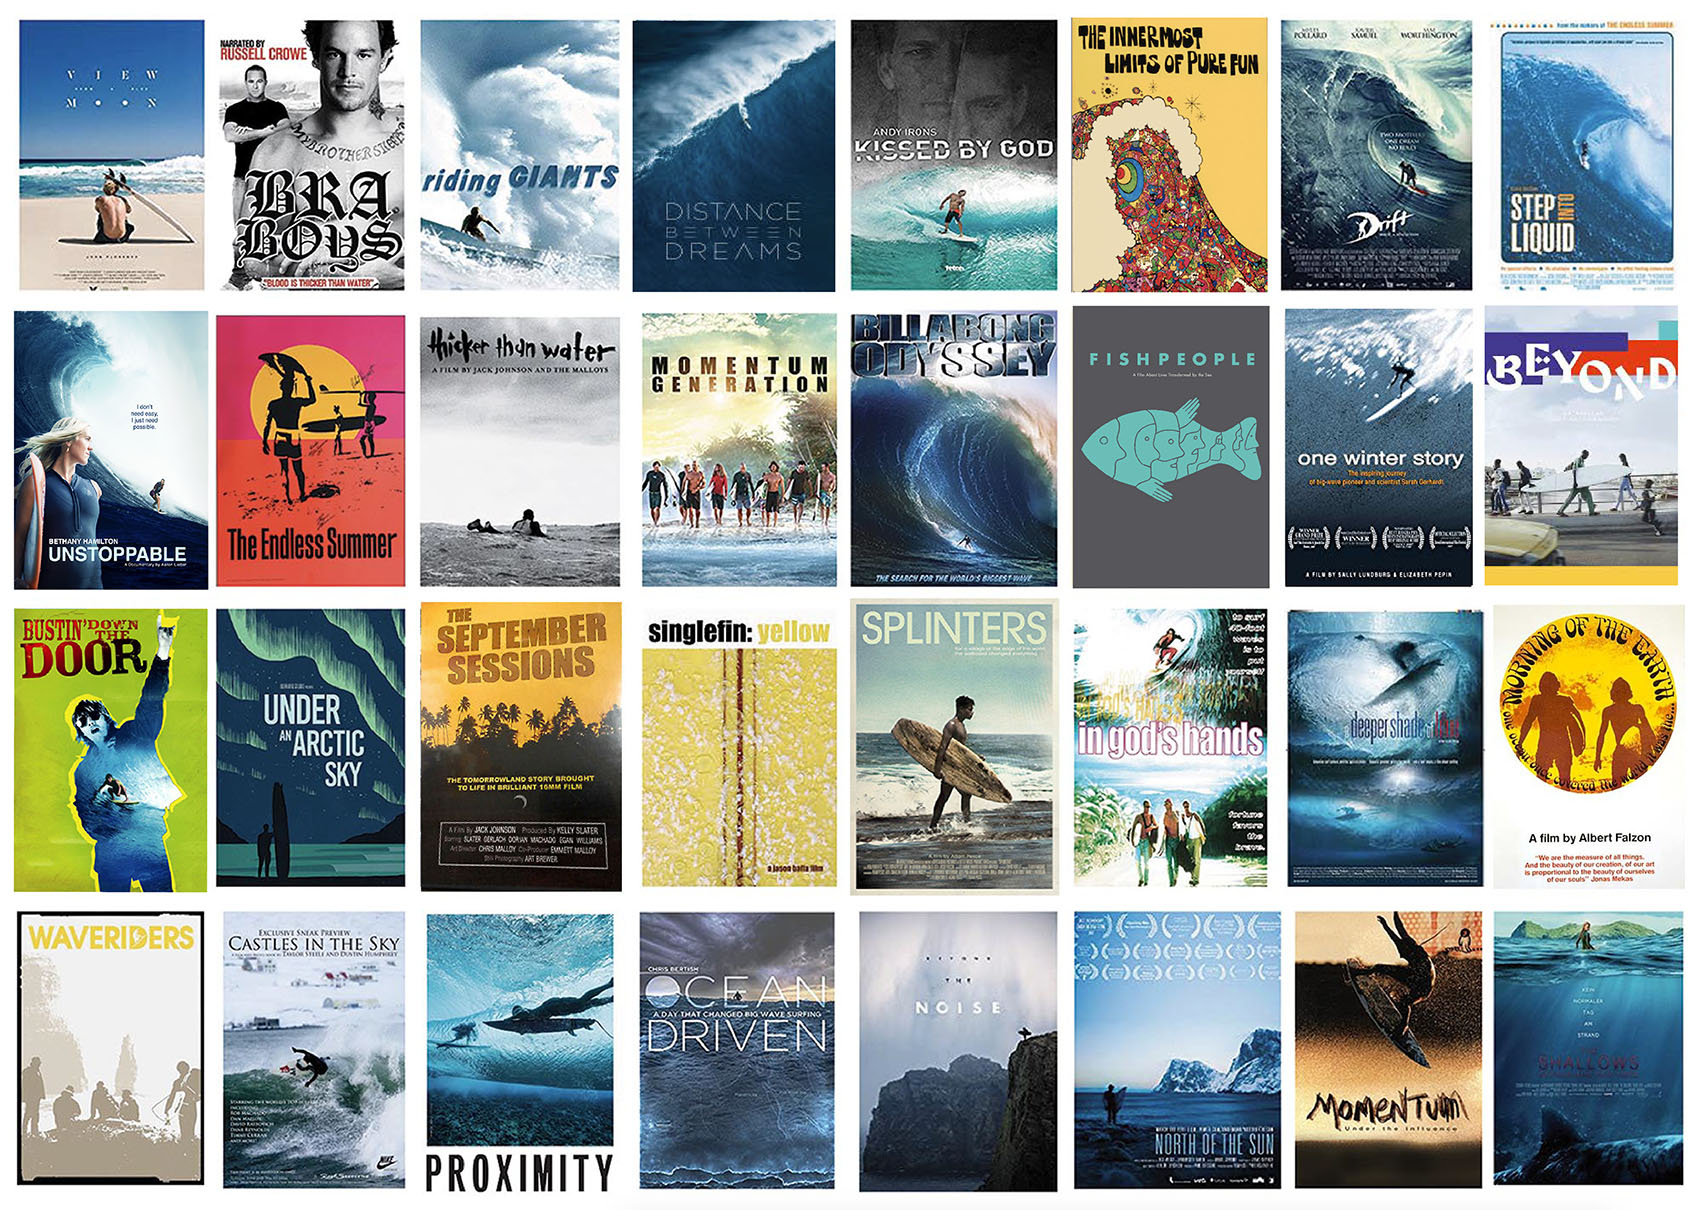 45 Of The Best Surf Movies - Surfd